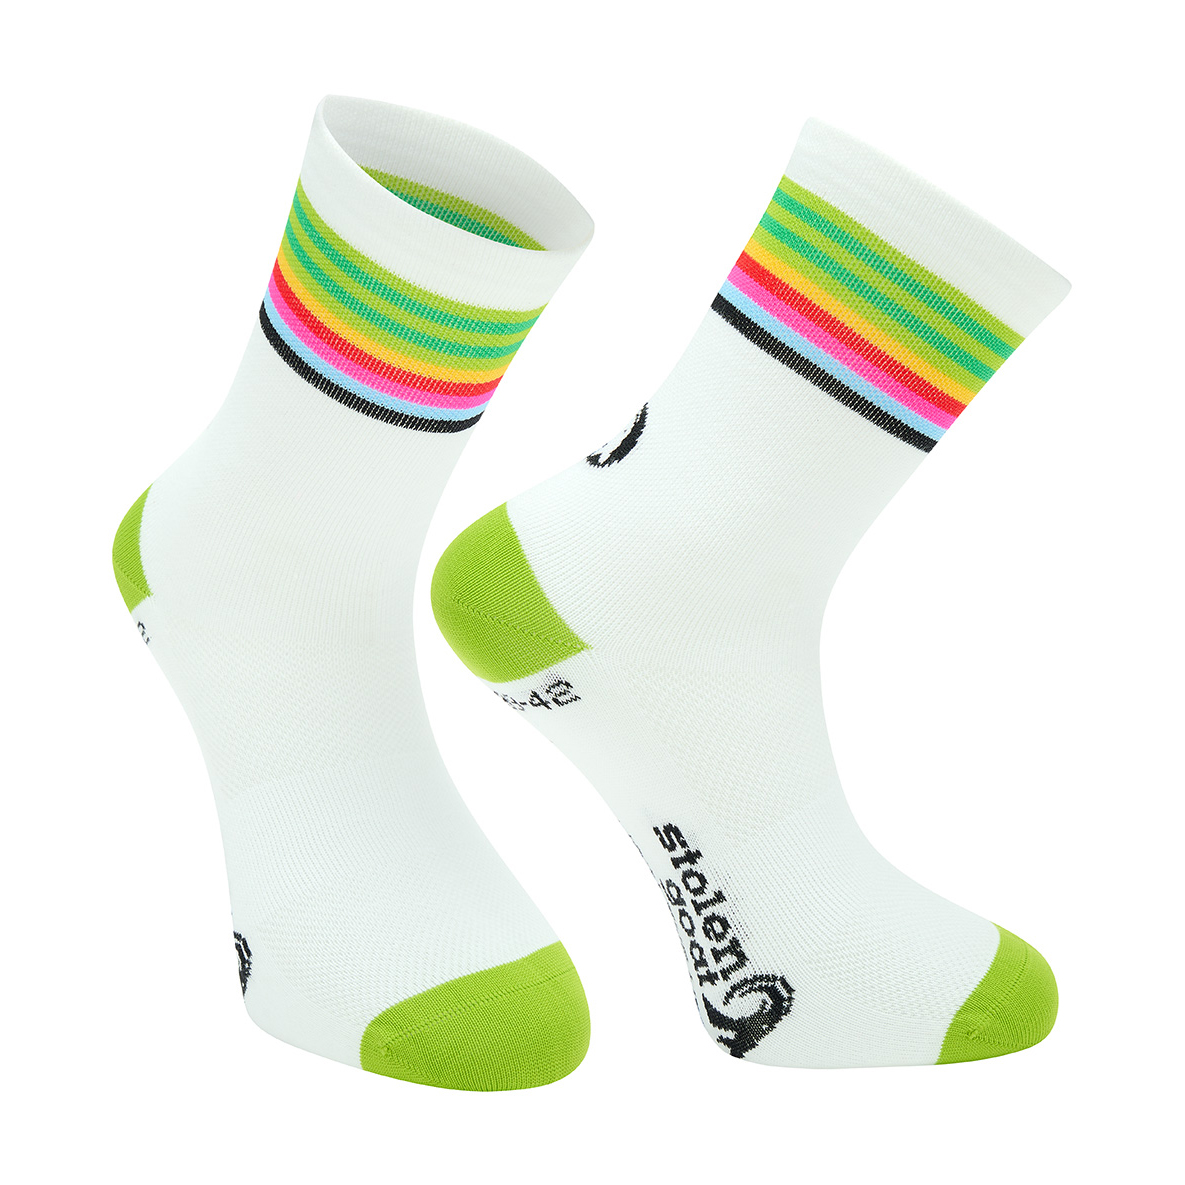 Stolen Goat Lithium crew length cycling socks white with green toe and heel and multi stripe at ankle